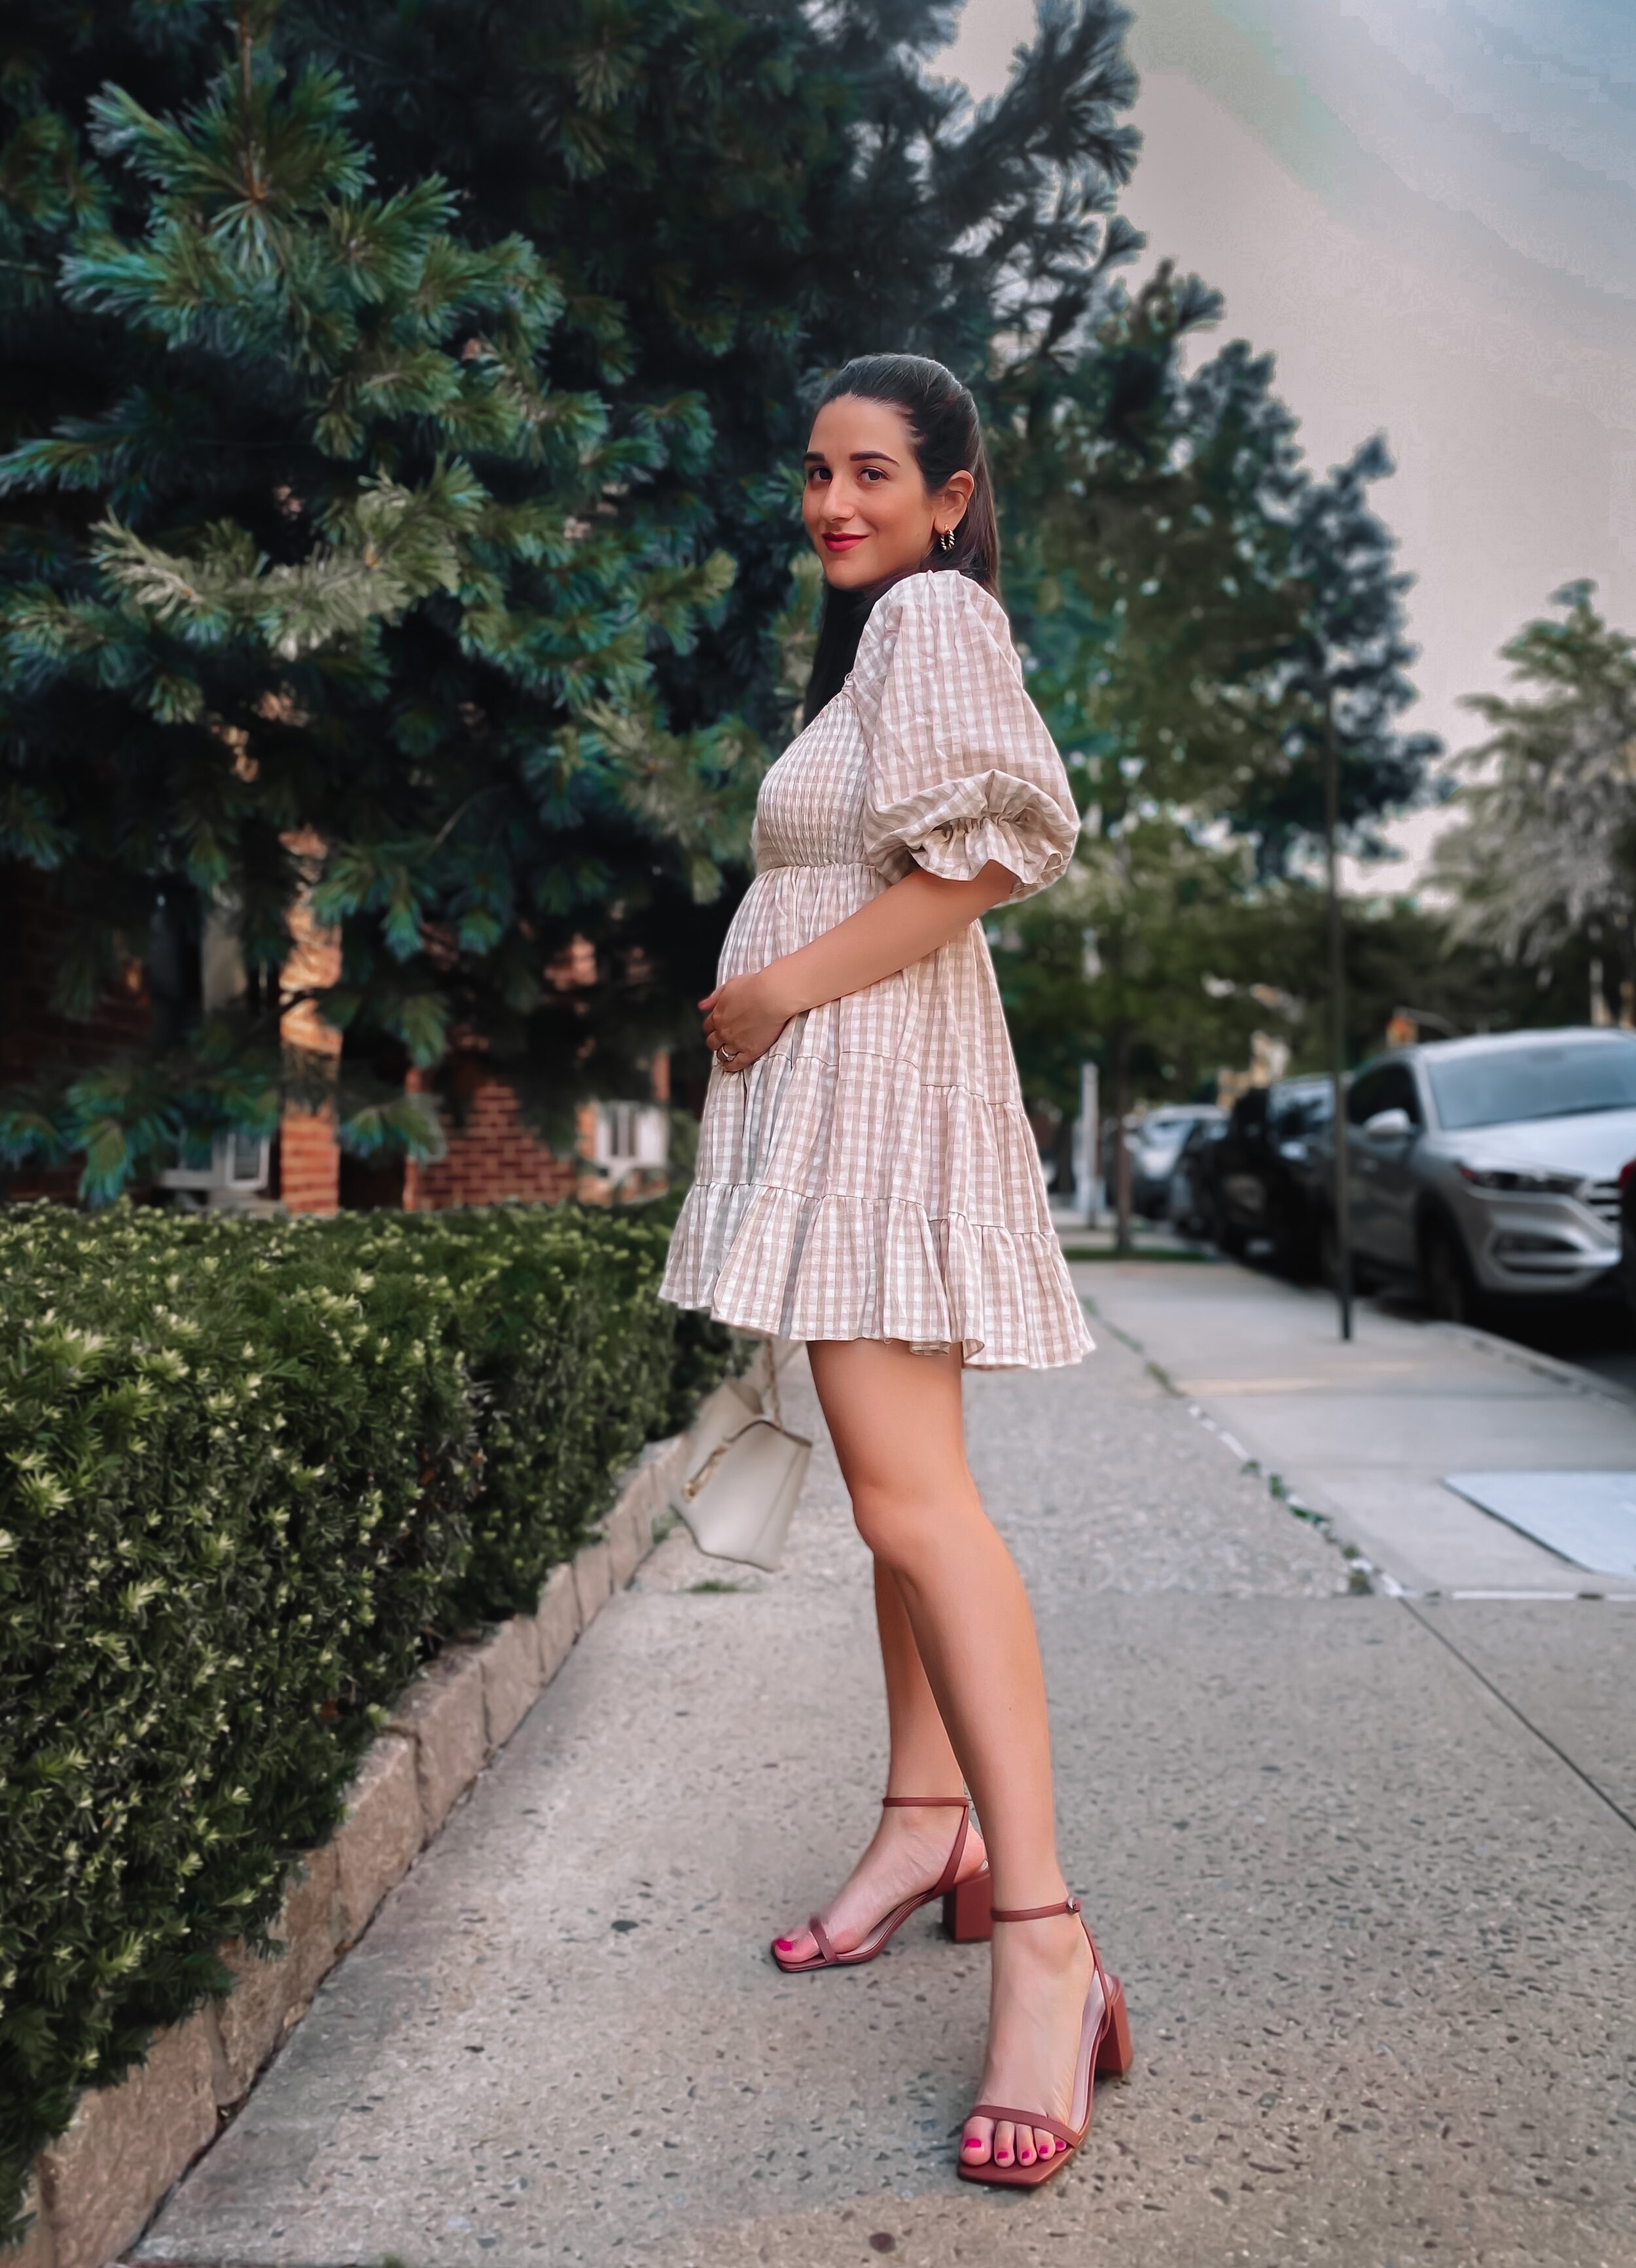 Gingham Puff Sleeve Dress + Tan Sandals Esther Santer NYC Street Style Fashion Blogger Cute Look Shopping Olive & Paix Mini Ruffle Dress Charles Keith Shoes Bag Gold Hoop Earrings Half Ponytail Girl Women Red Lipstick New York City 2021  What To Wear.jpg